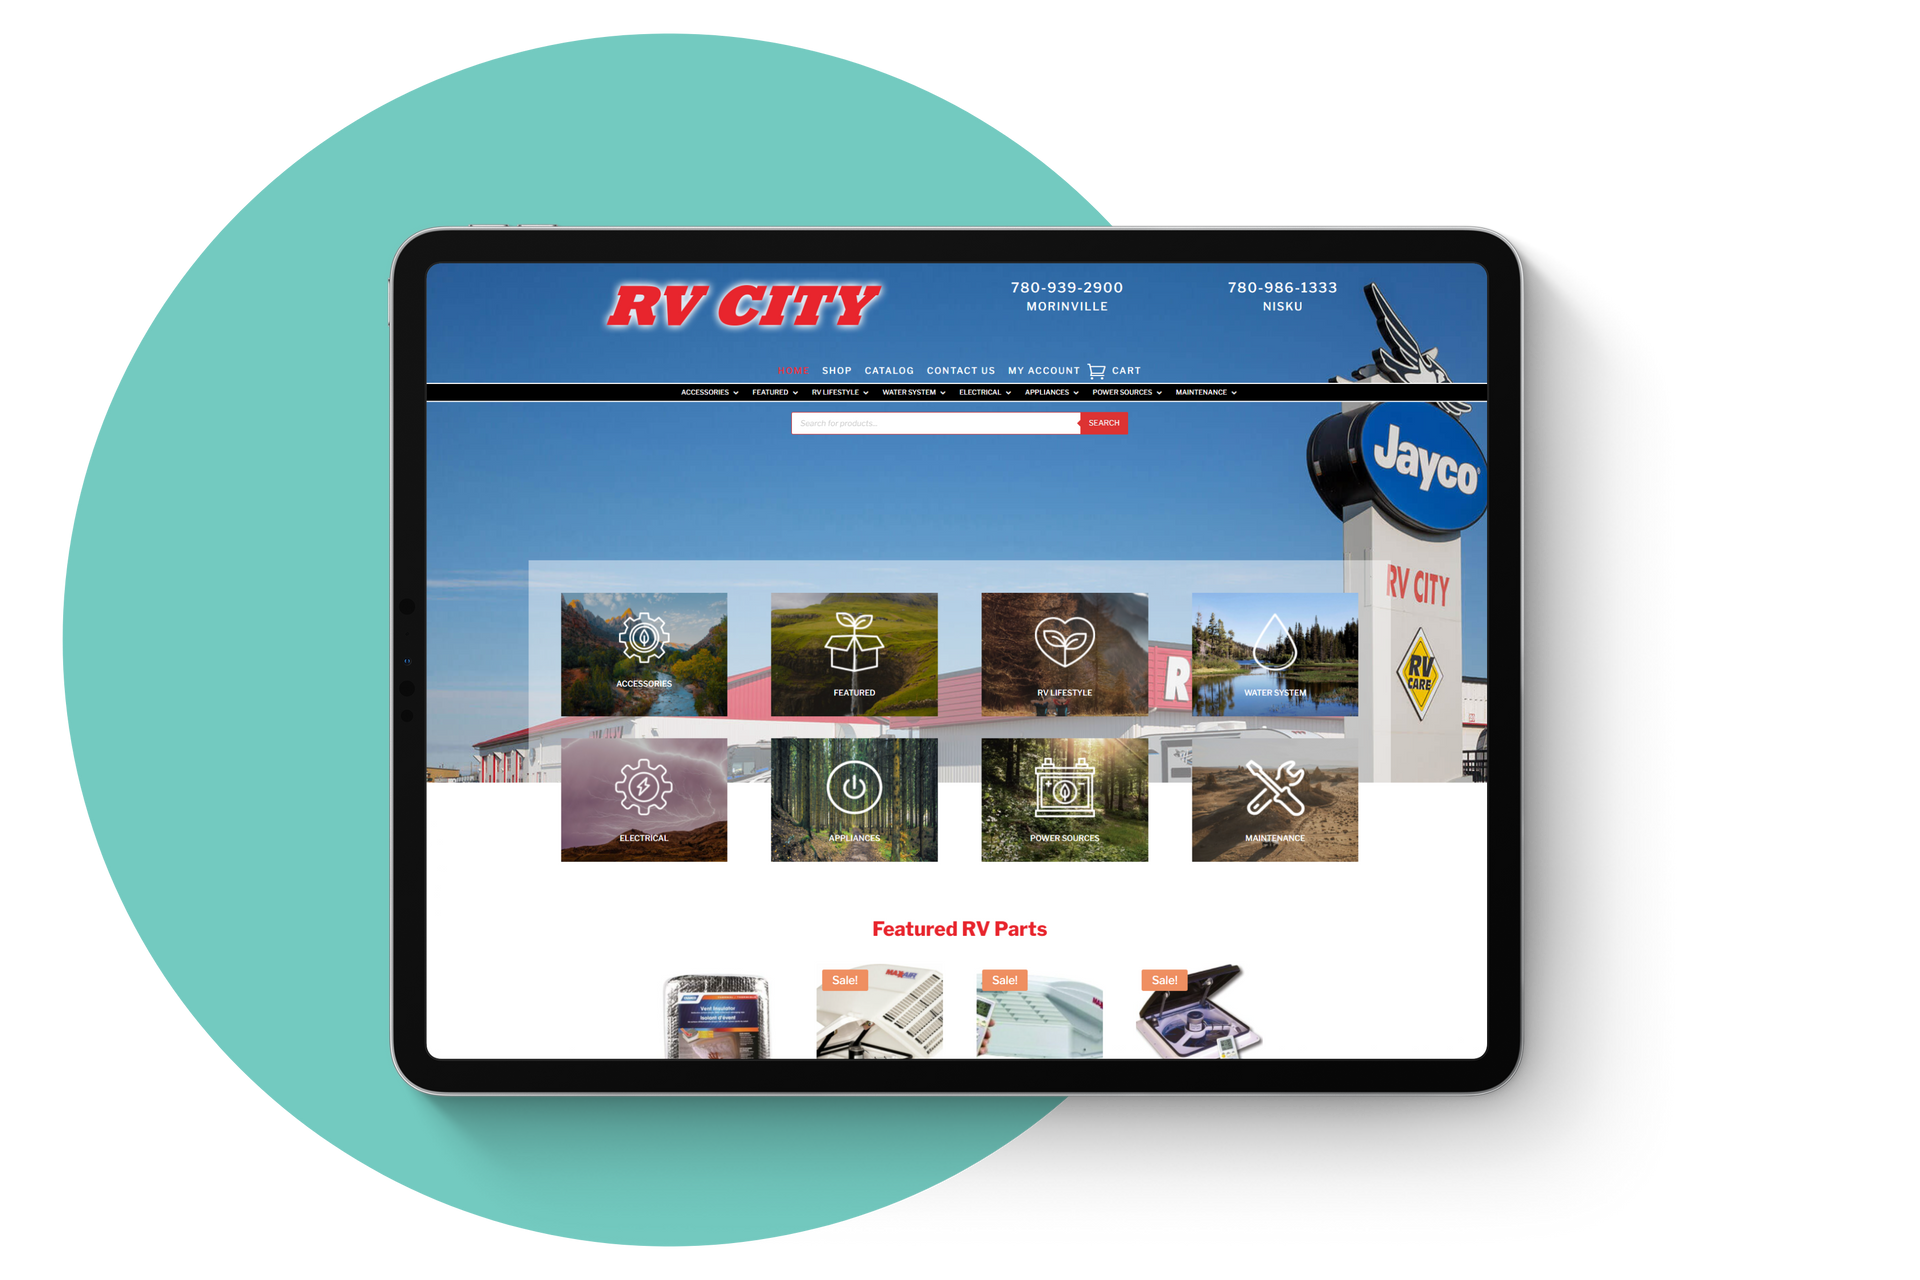 A tablet is displaying a website for rv city.